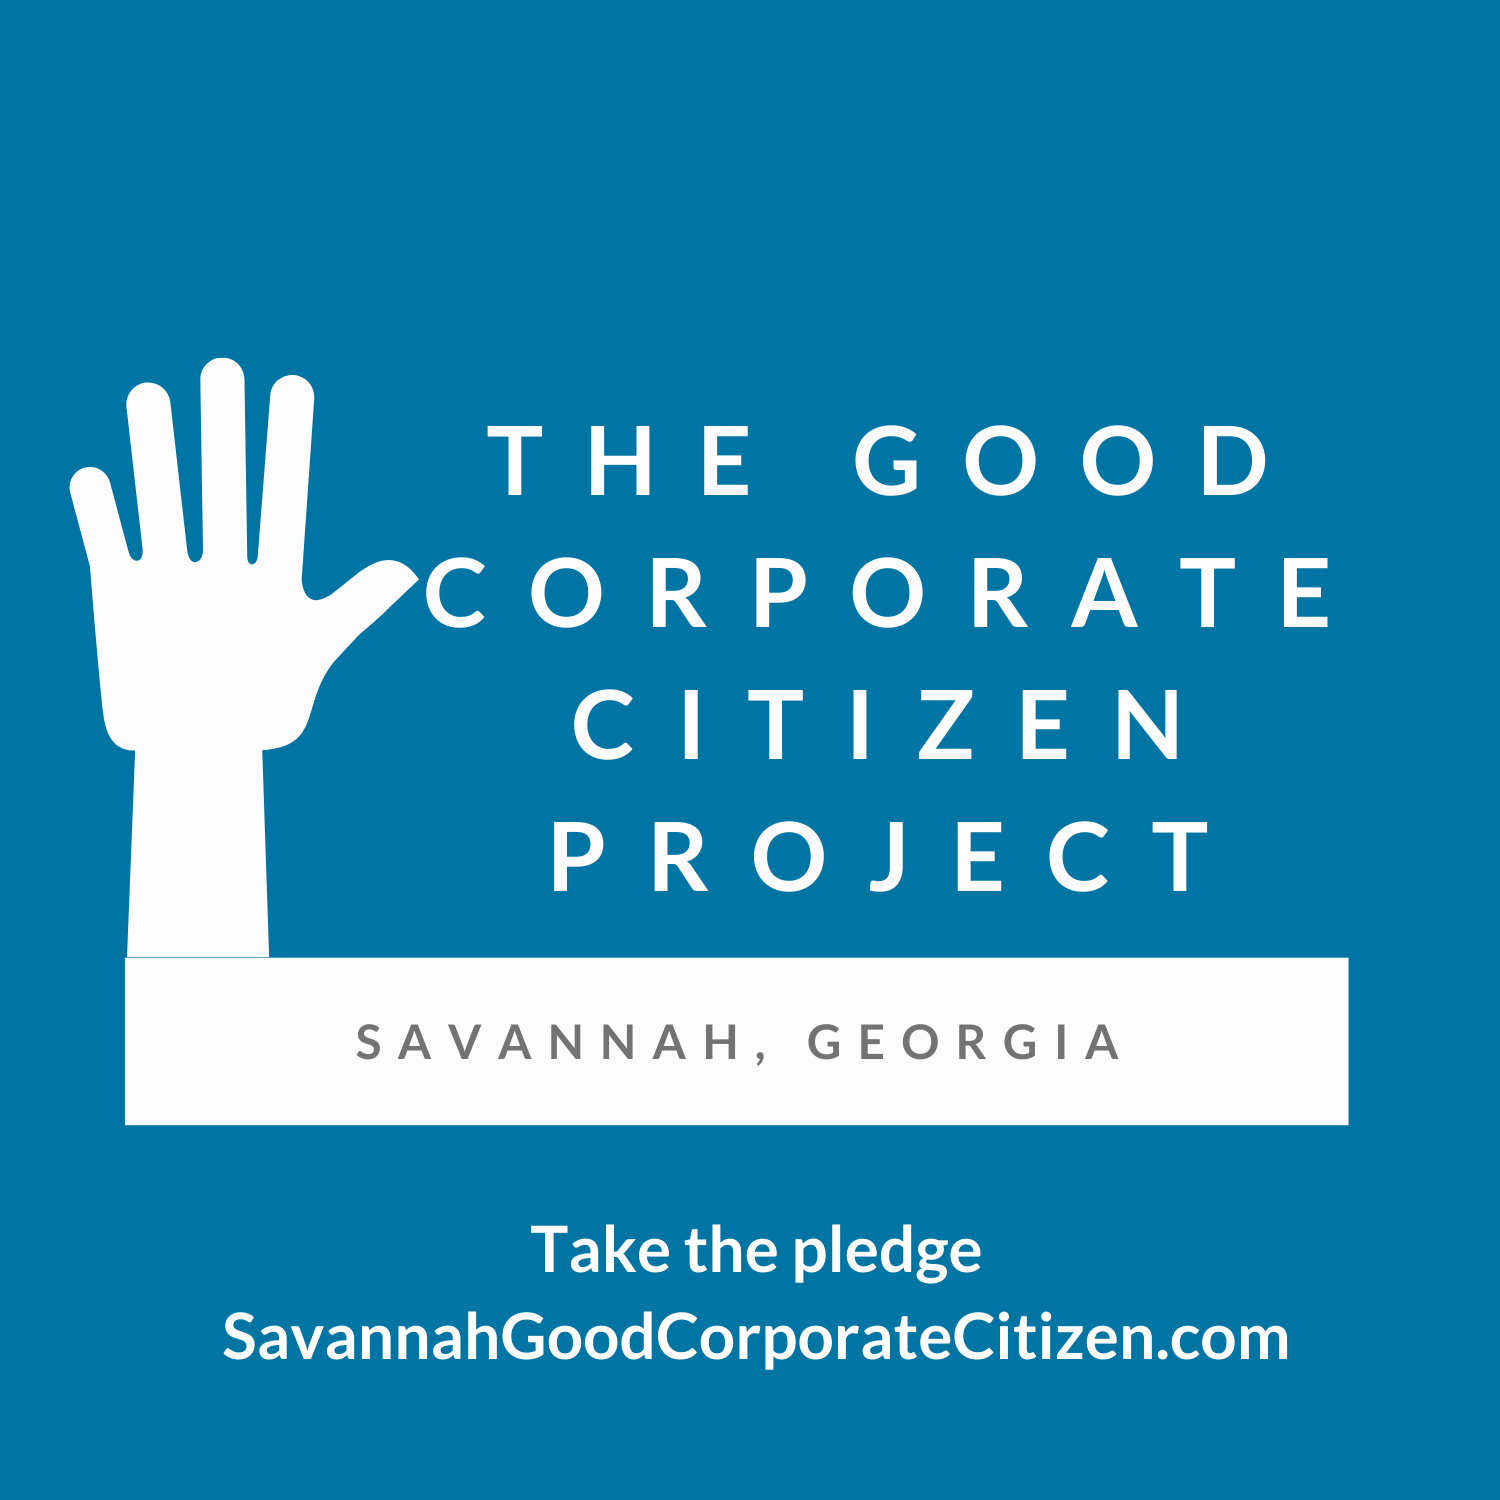 General 1 — The Good Corporate Citizen Project